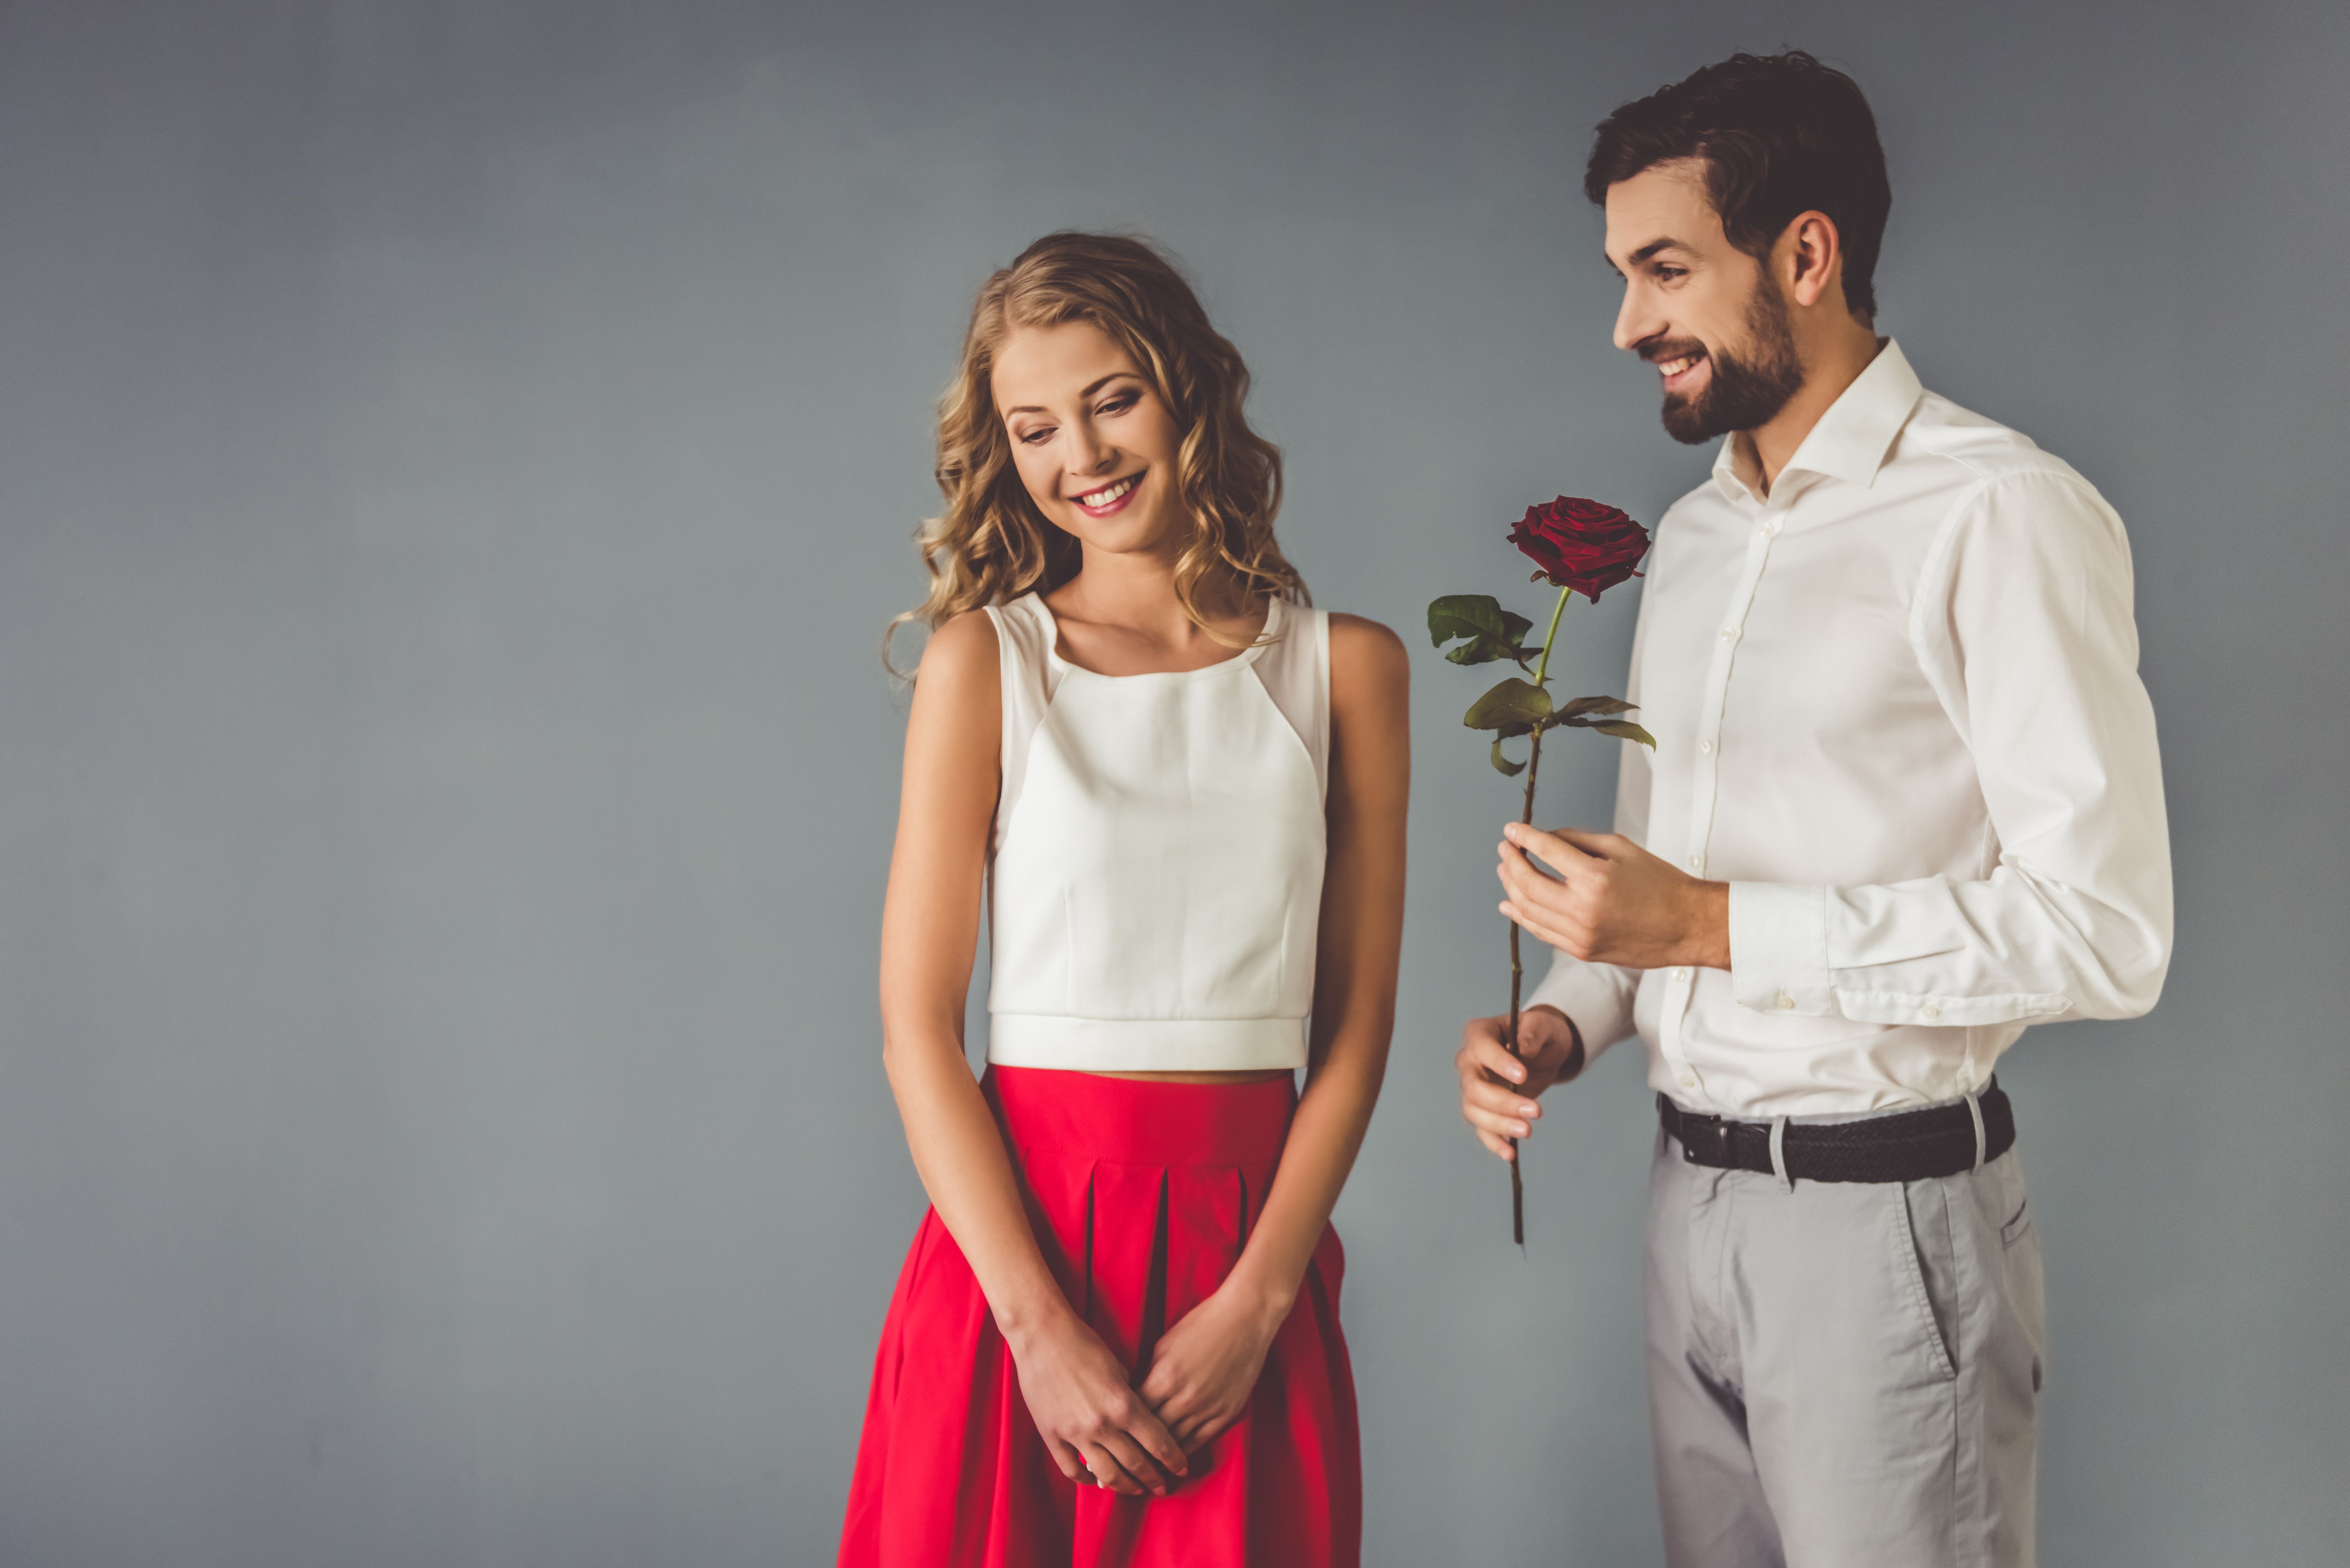 A man gives a girl a red rose. | Source: Shutterstock